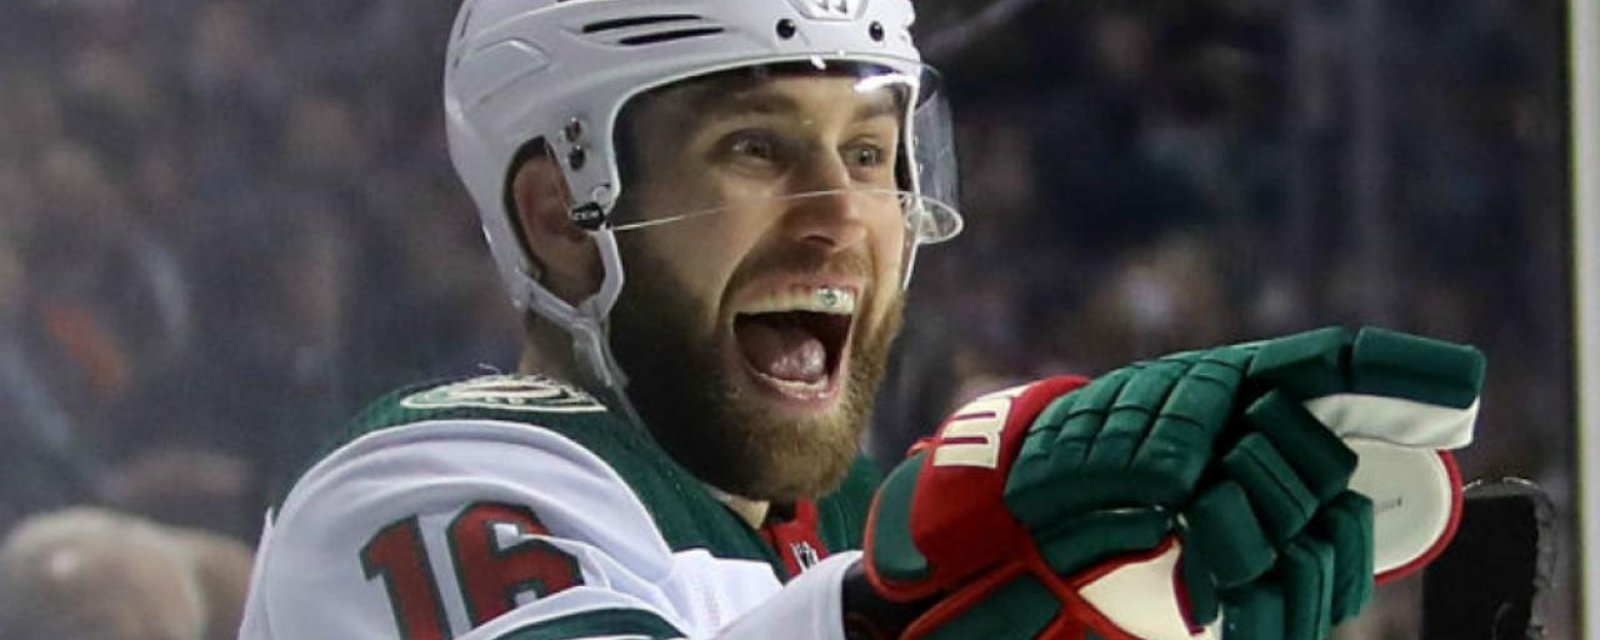 Zucker to get traded to Calgary after Flames strike back with perfect pitch!?